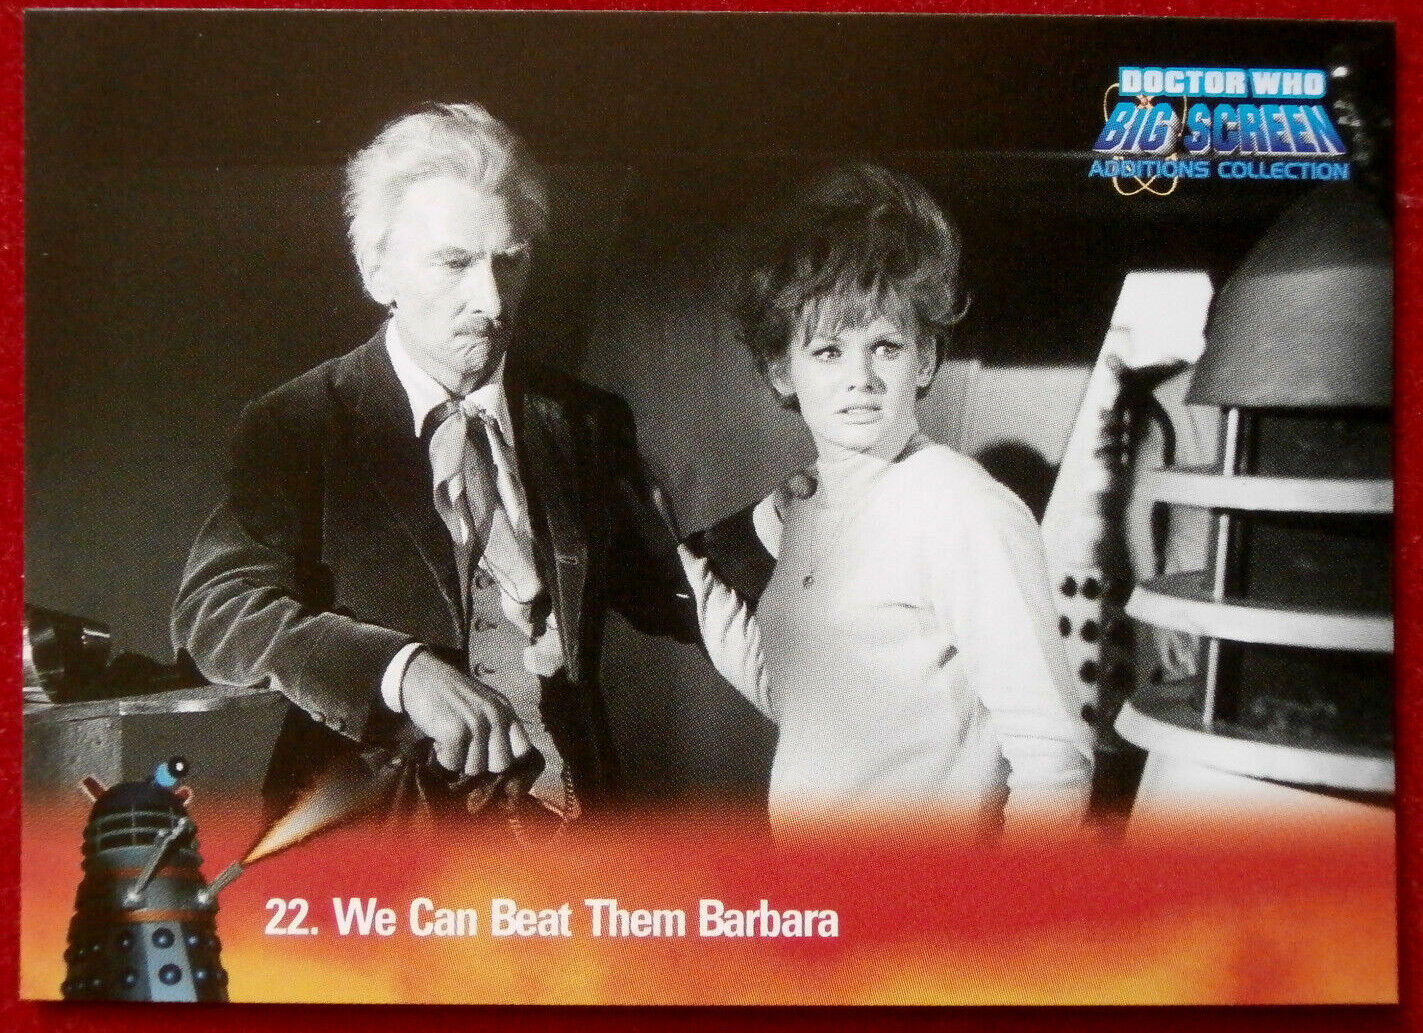 DR WHO - Big Screen Additions - Card #22 - WE CAN BEAT THEM BARBARA Strictly Ink